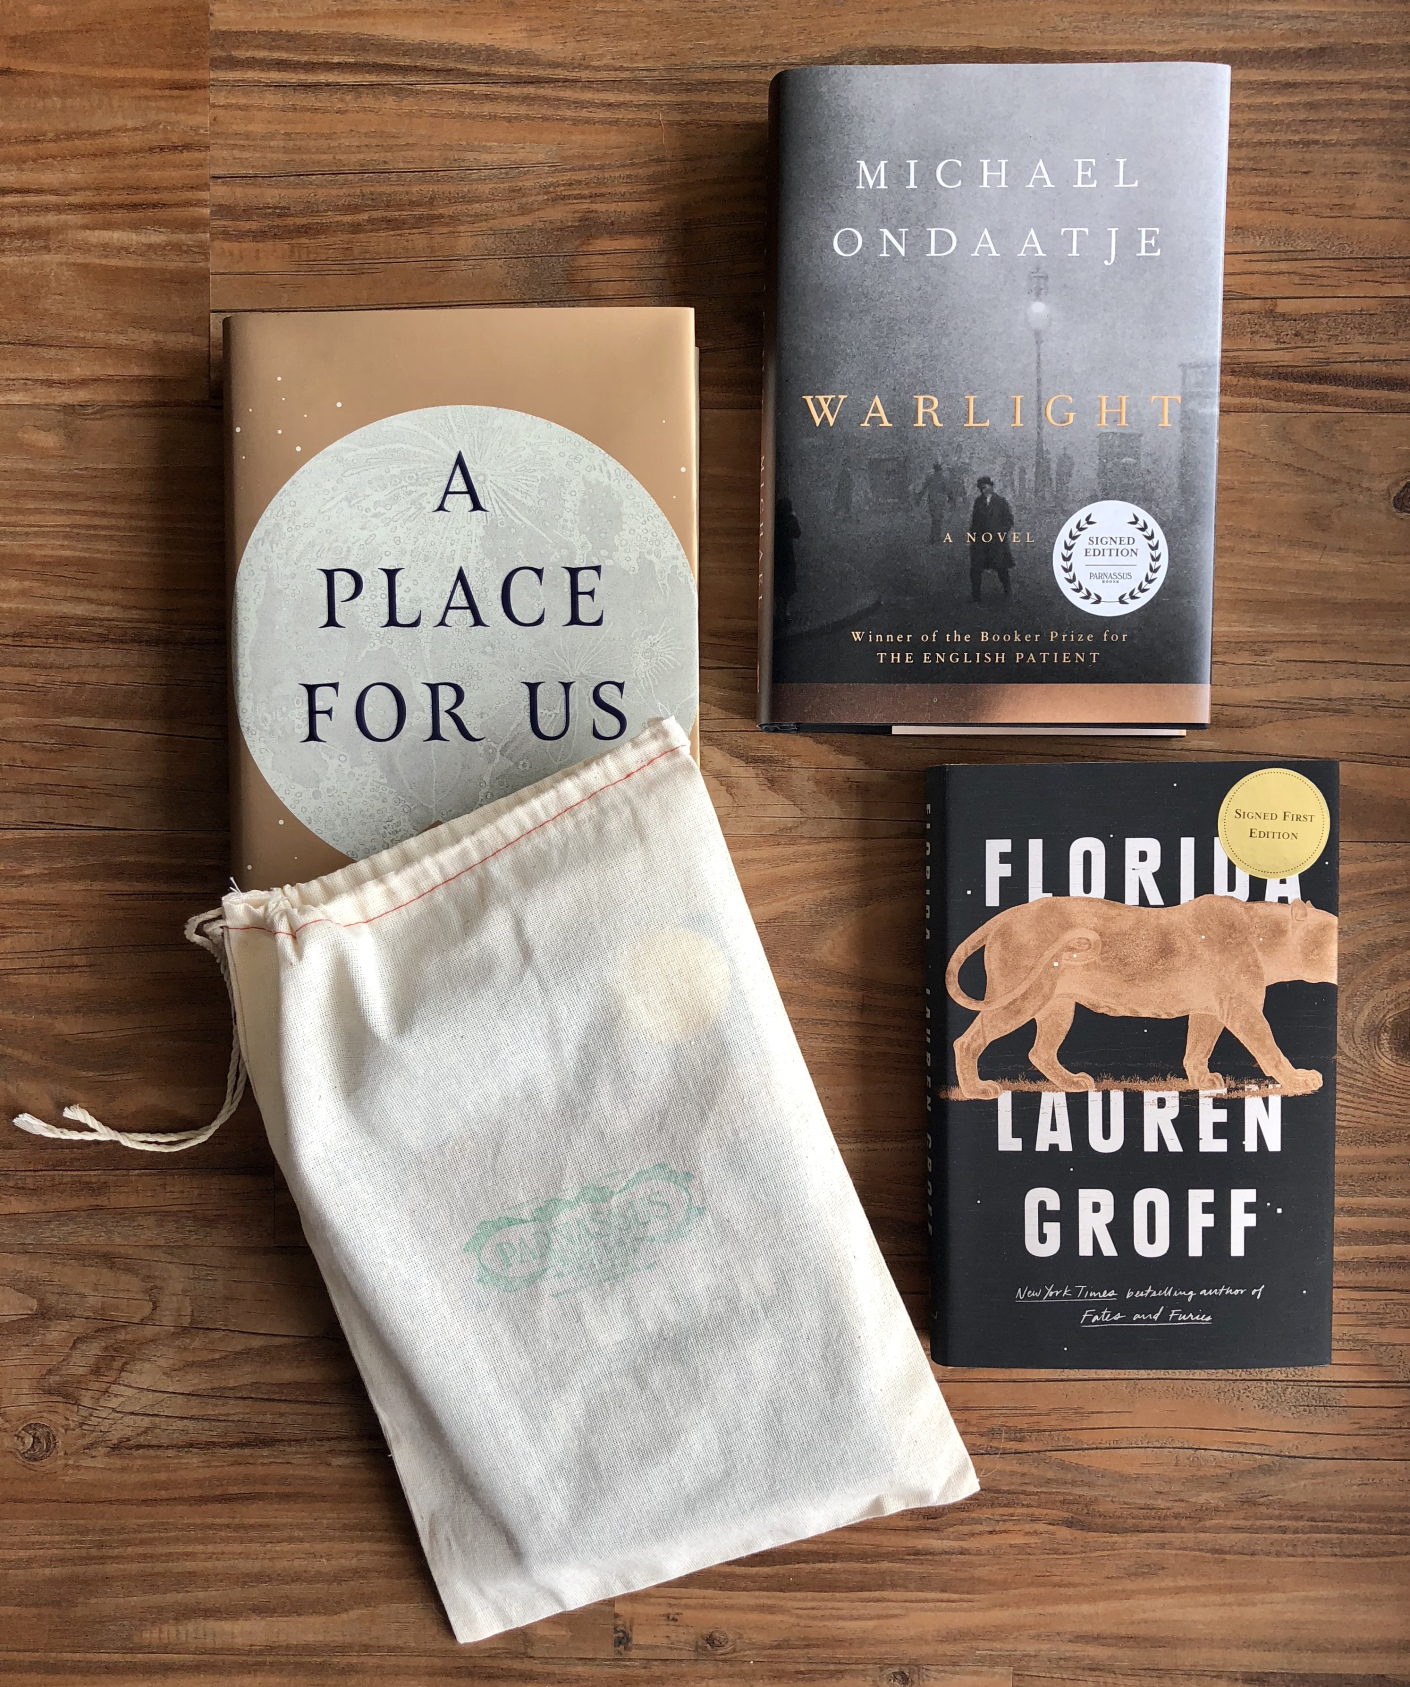 Awesome Father's Day gifts that support indie bookstores | Let the staff at your favorite book shop customize a book bundle for dad, like this one from Parnassus Books in Nashville. 